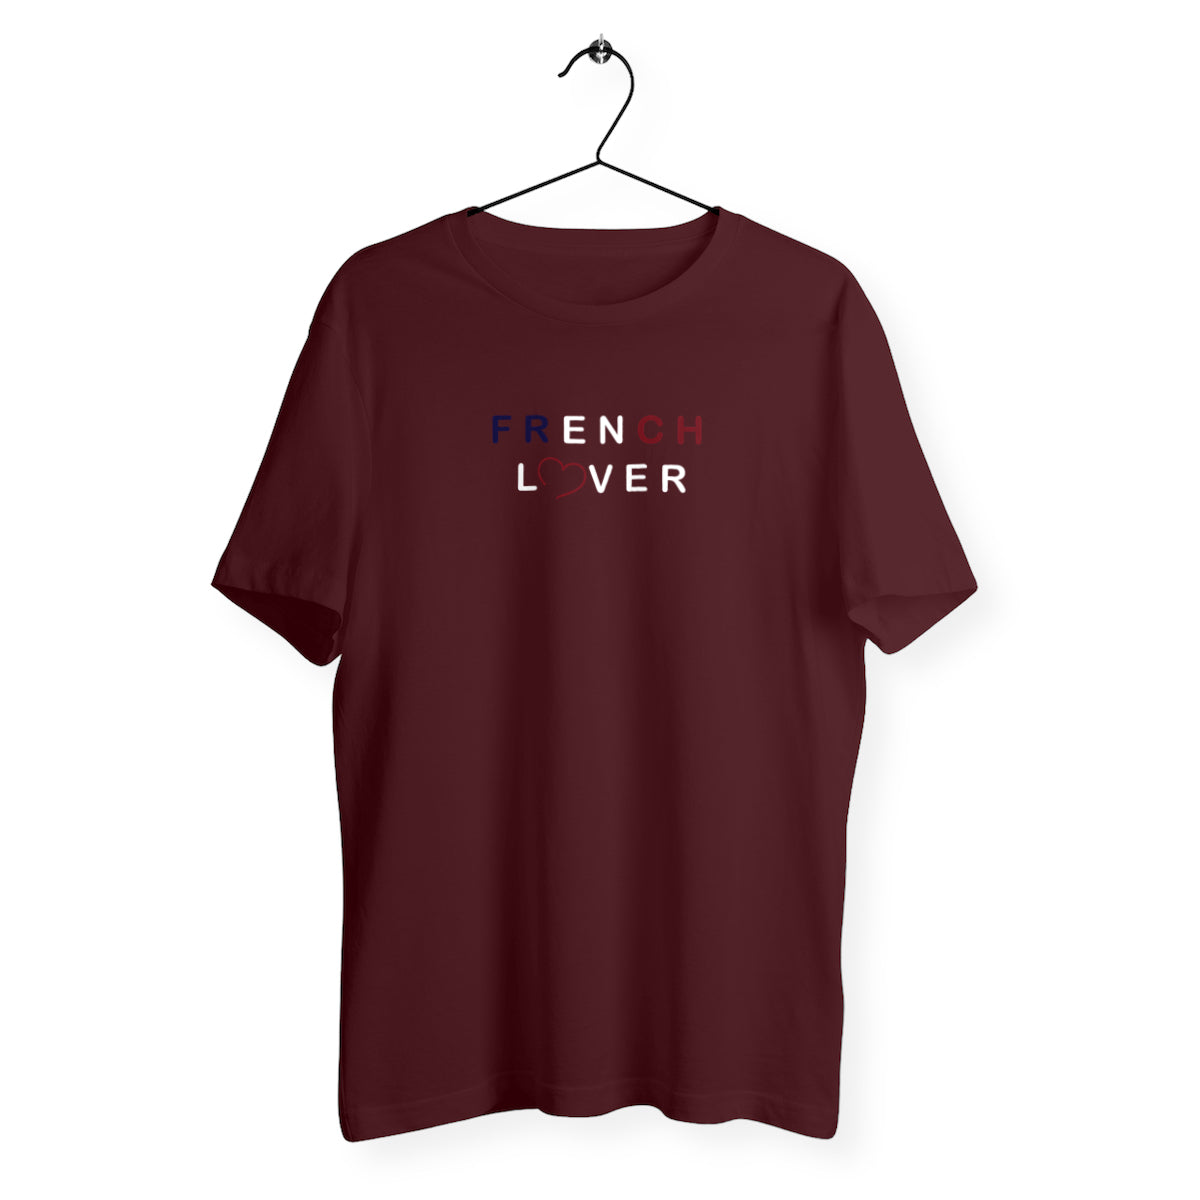 T-Shirt Homme Bio - French Lover, T-shirt french lover en coton bio de TFrench, t-shirt french lover, t-shirt homme saint valentin, tee shirt homme french lover, t-shirt saint valentin, t-shirt idée cadeau, tee shirt en coton bio, t-shirt french lover rouge